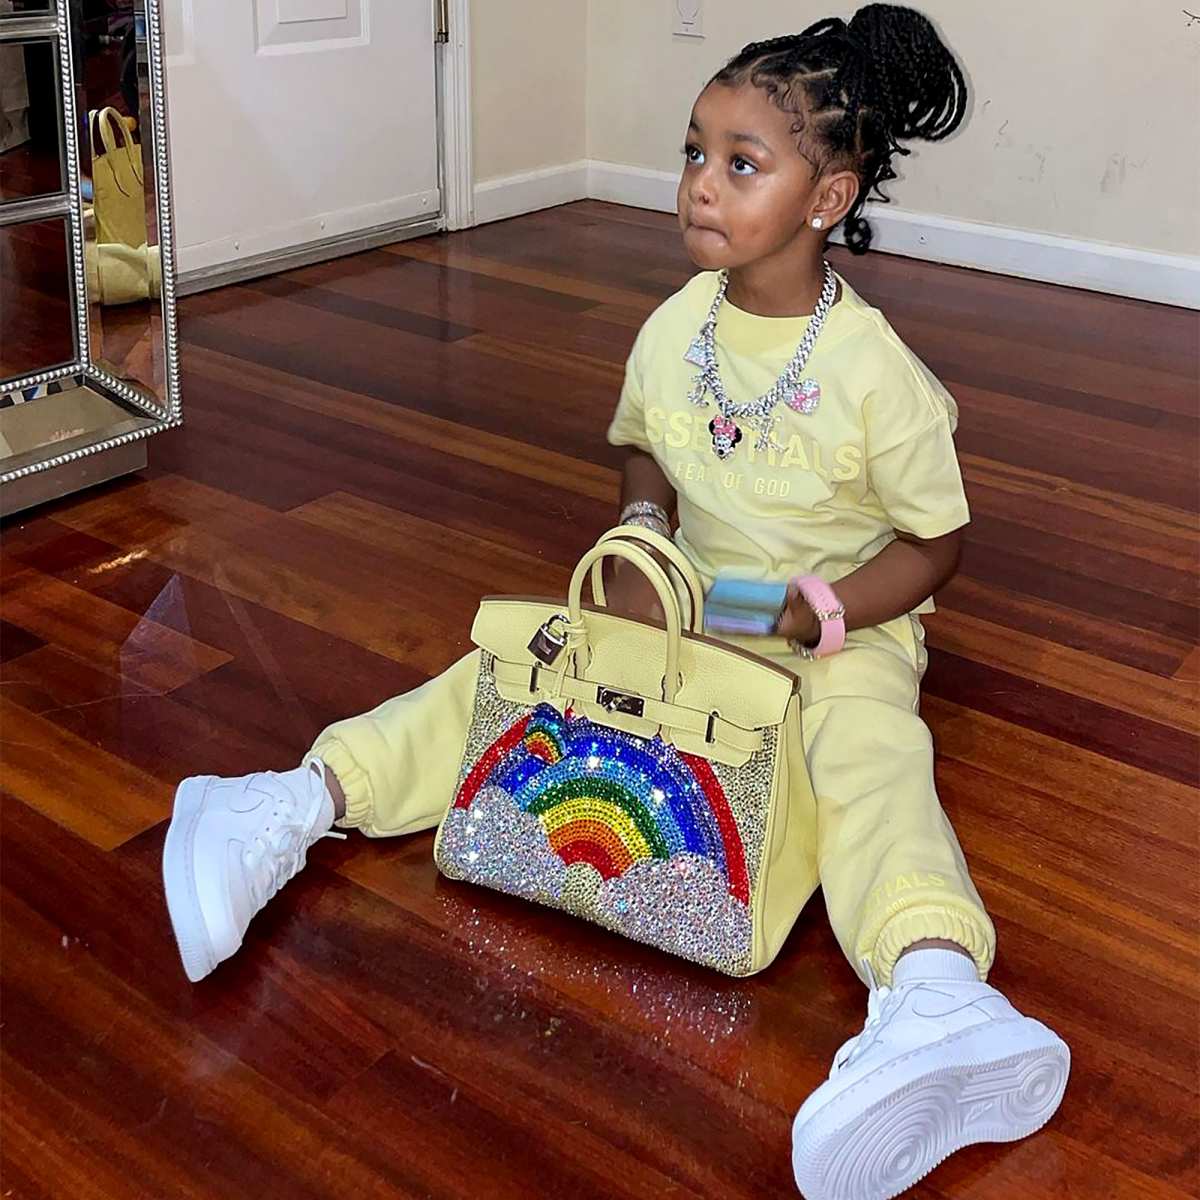 Cardi B And Offset gifts daughter Birkin bag worth Gh200k for her